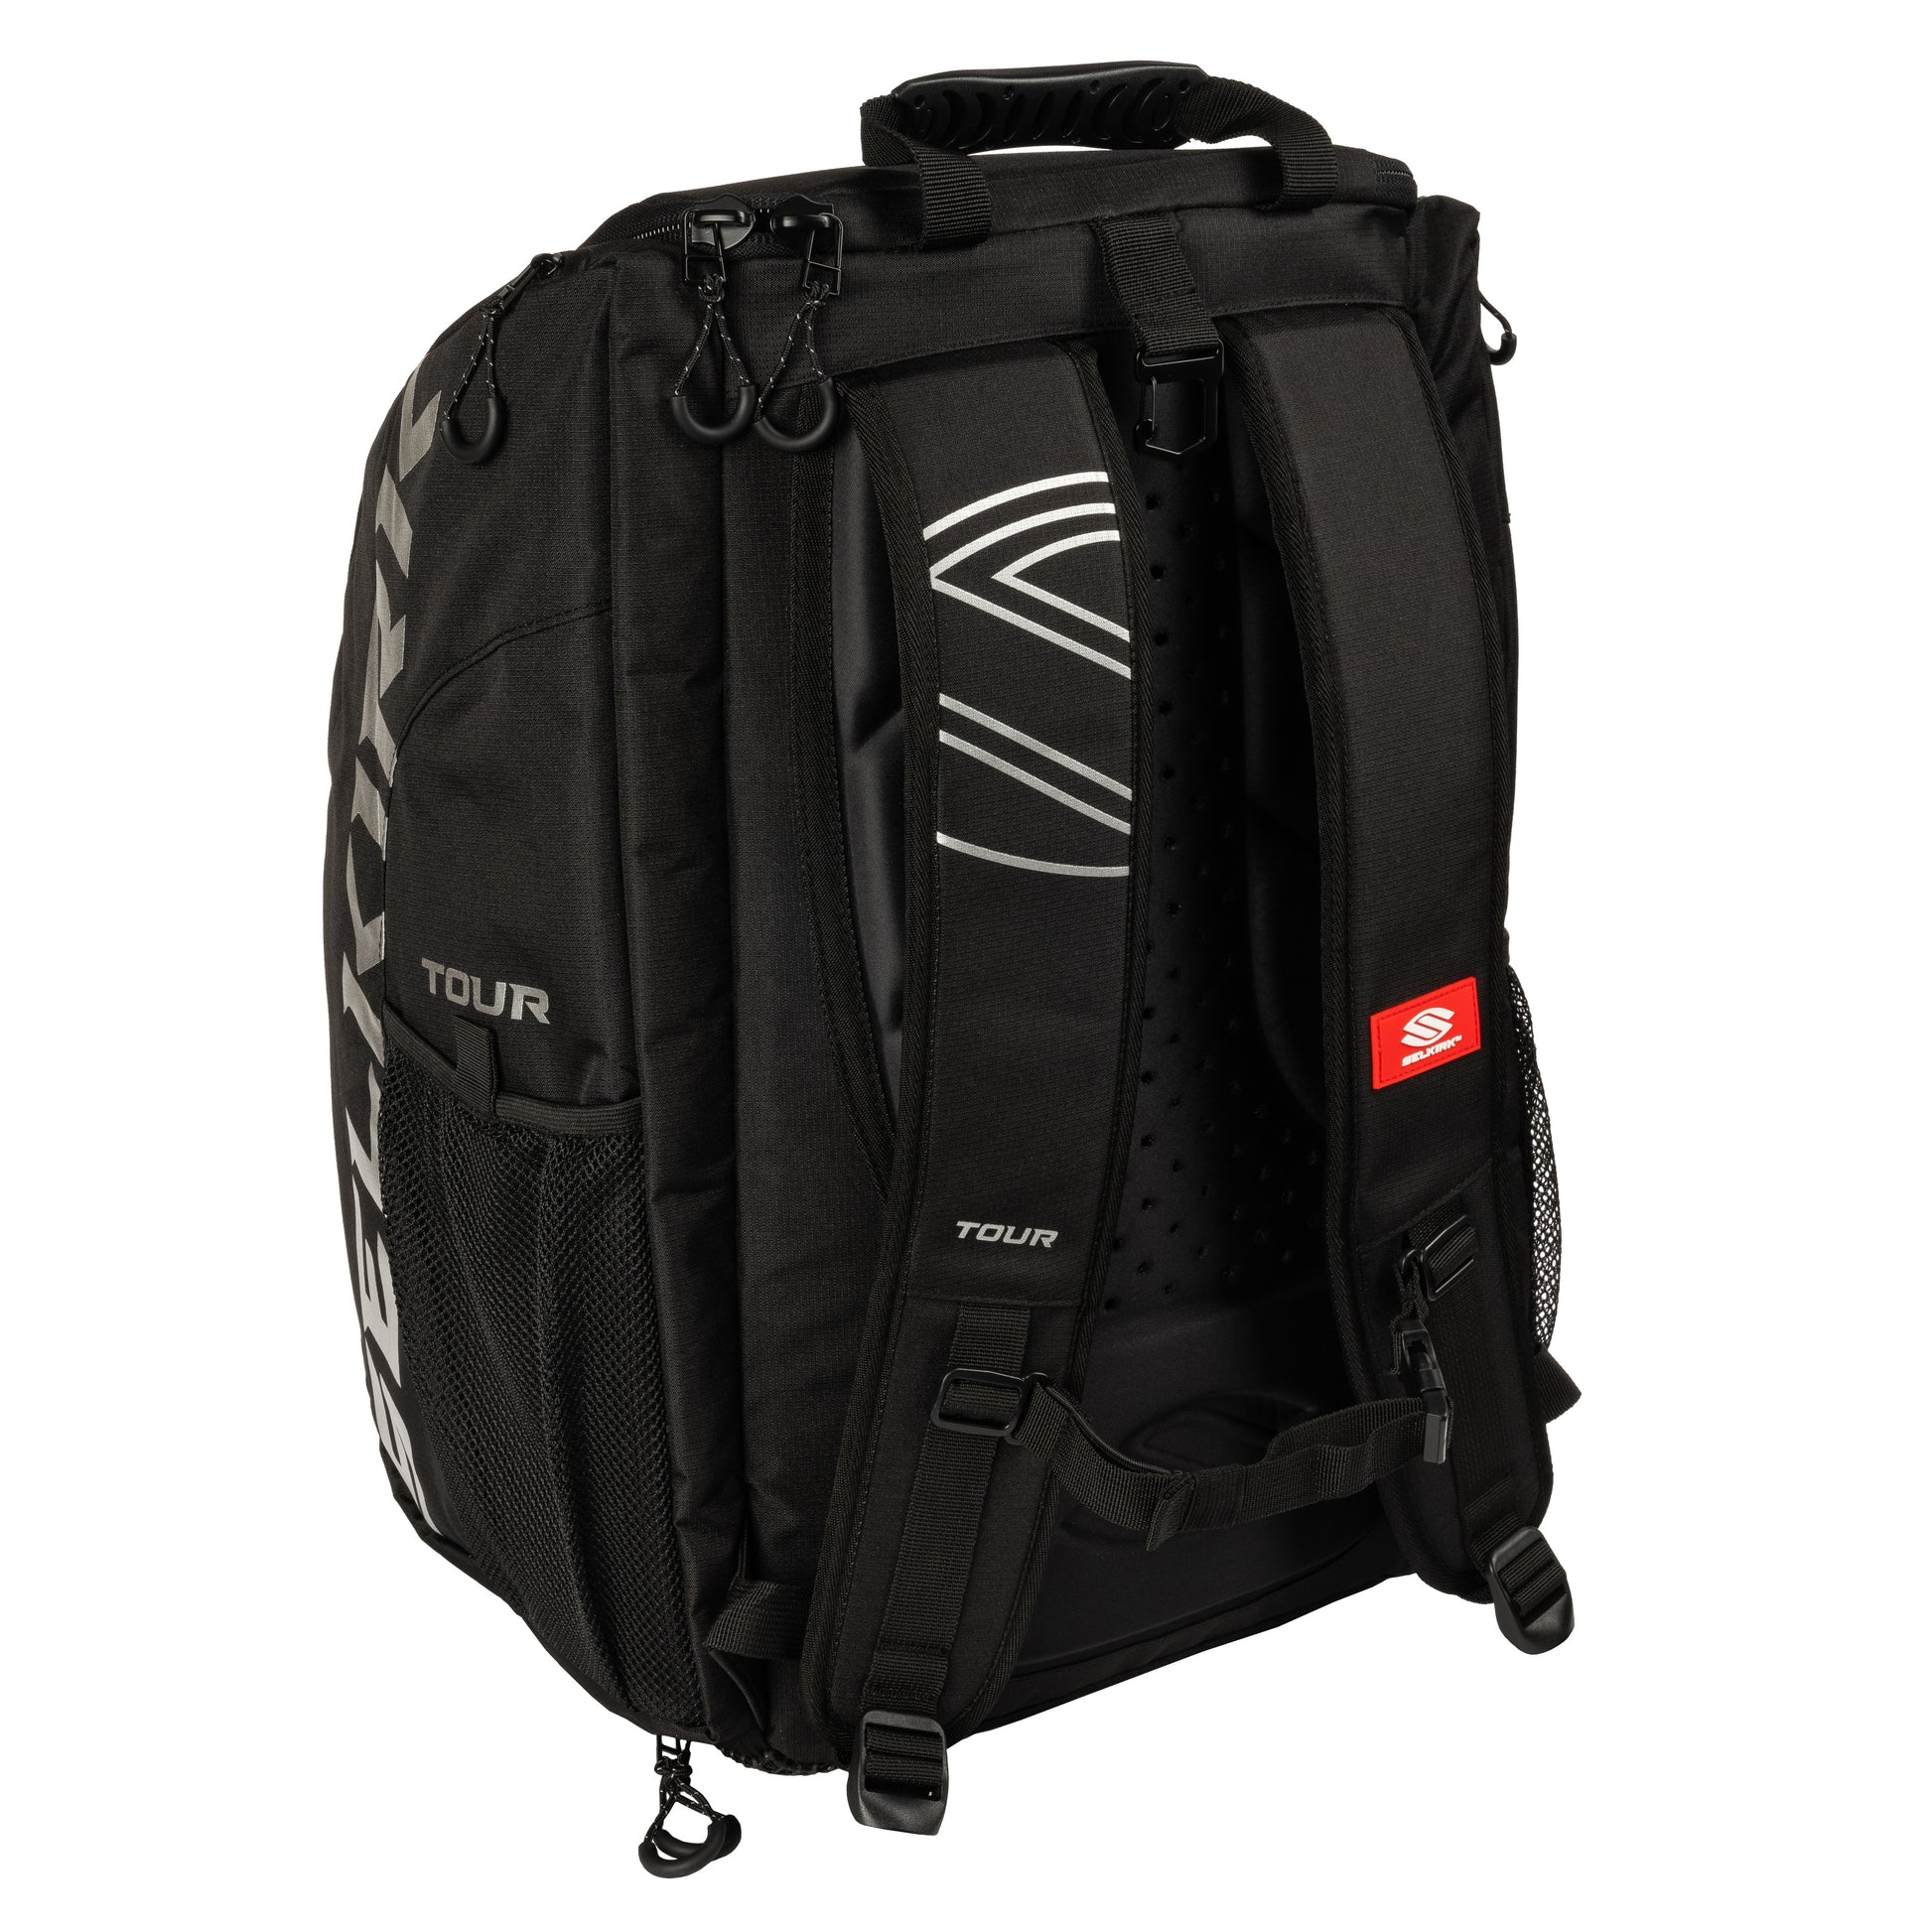 A Selkirk Core Series Tour Backpack Pickleball Bag with a white logo on it.